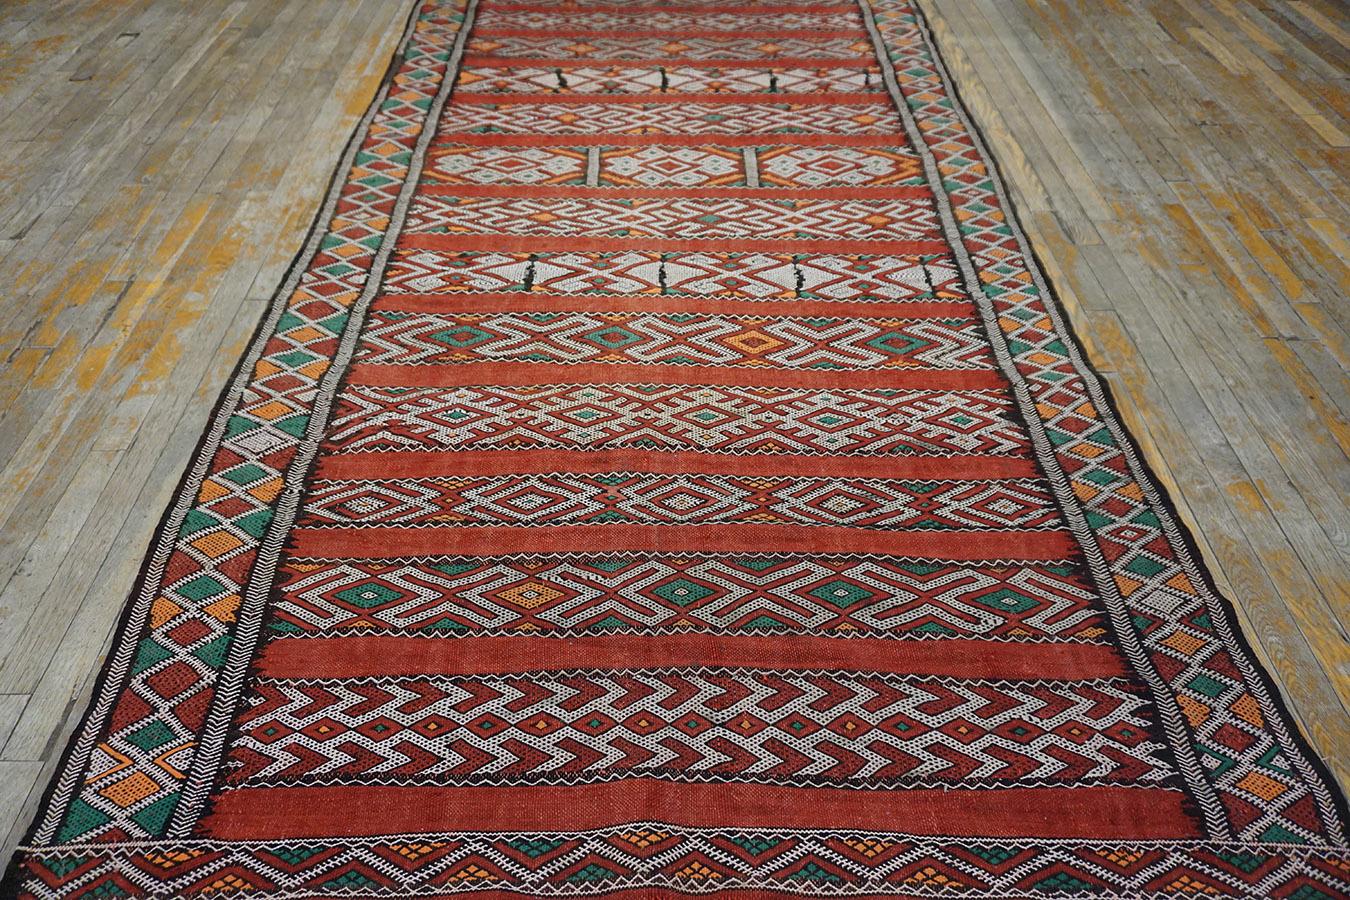 Hand-Woven Mid 20th Century Moroccan Flat-weave Carpet ( 5' x 10'3